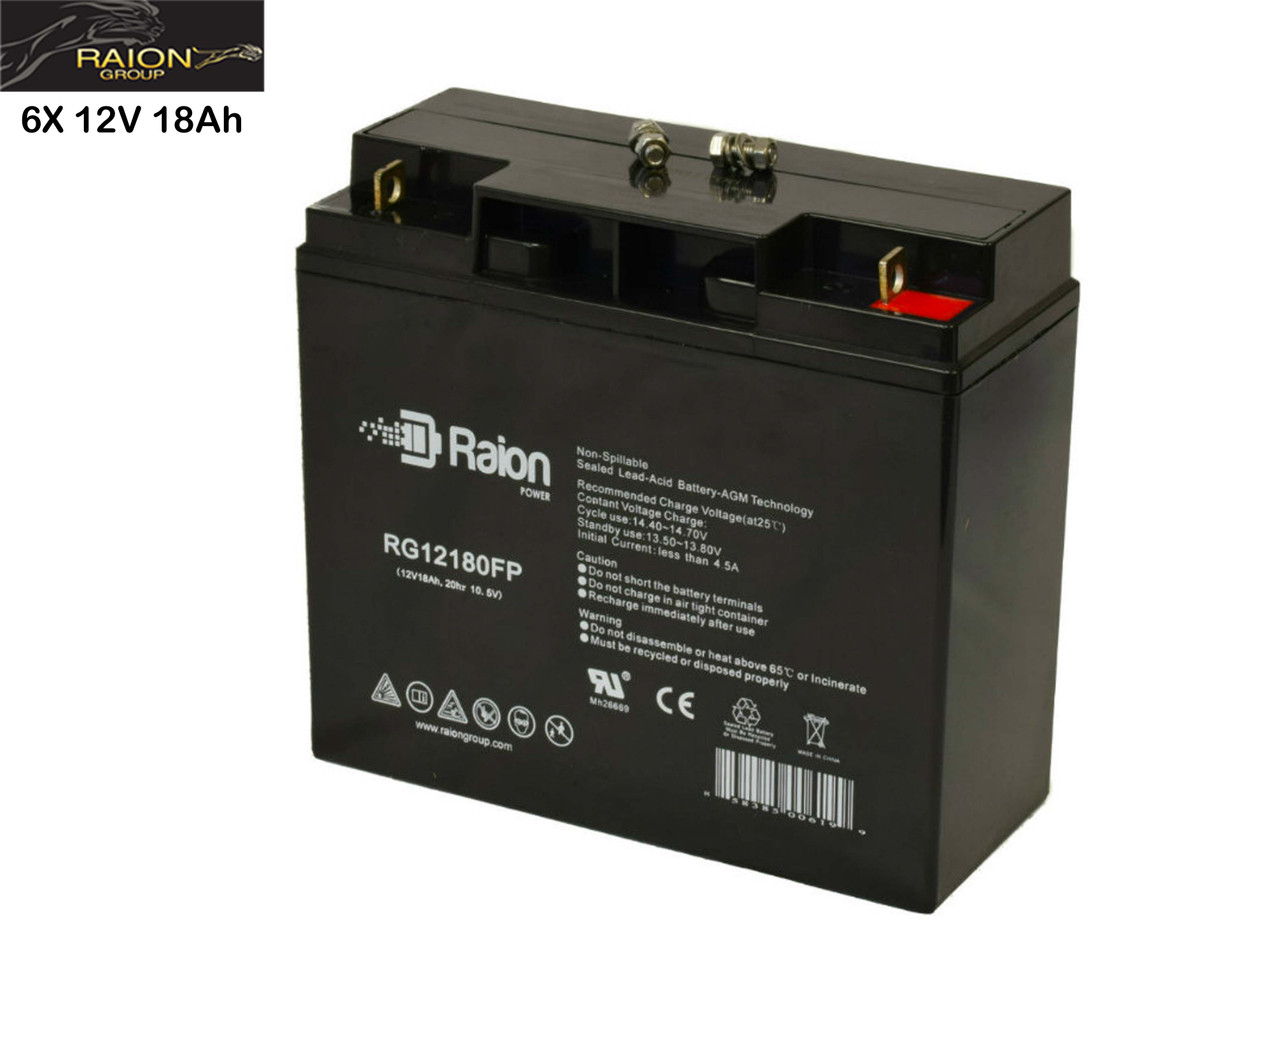 Raion Power Replacement 12V 18Ah Battery for Tao Motor Taurus 804 - 6 Pack